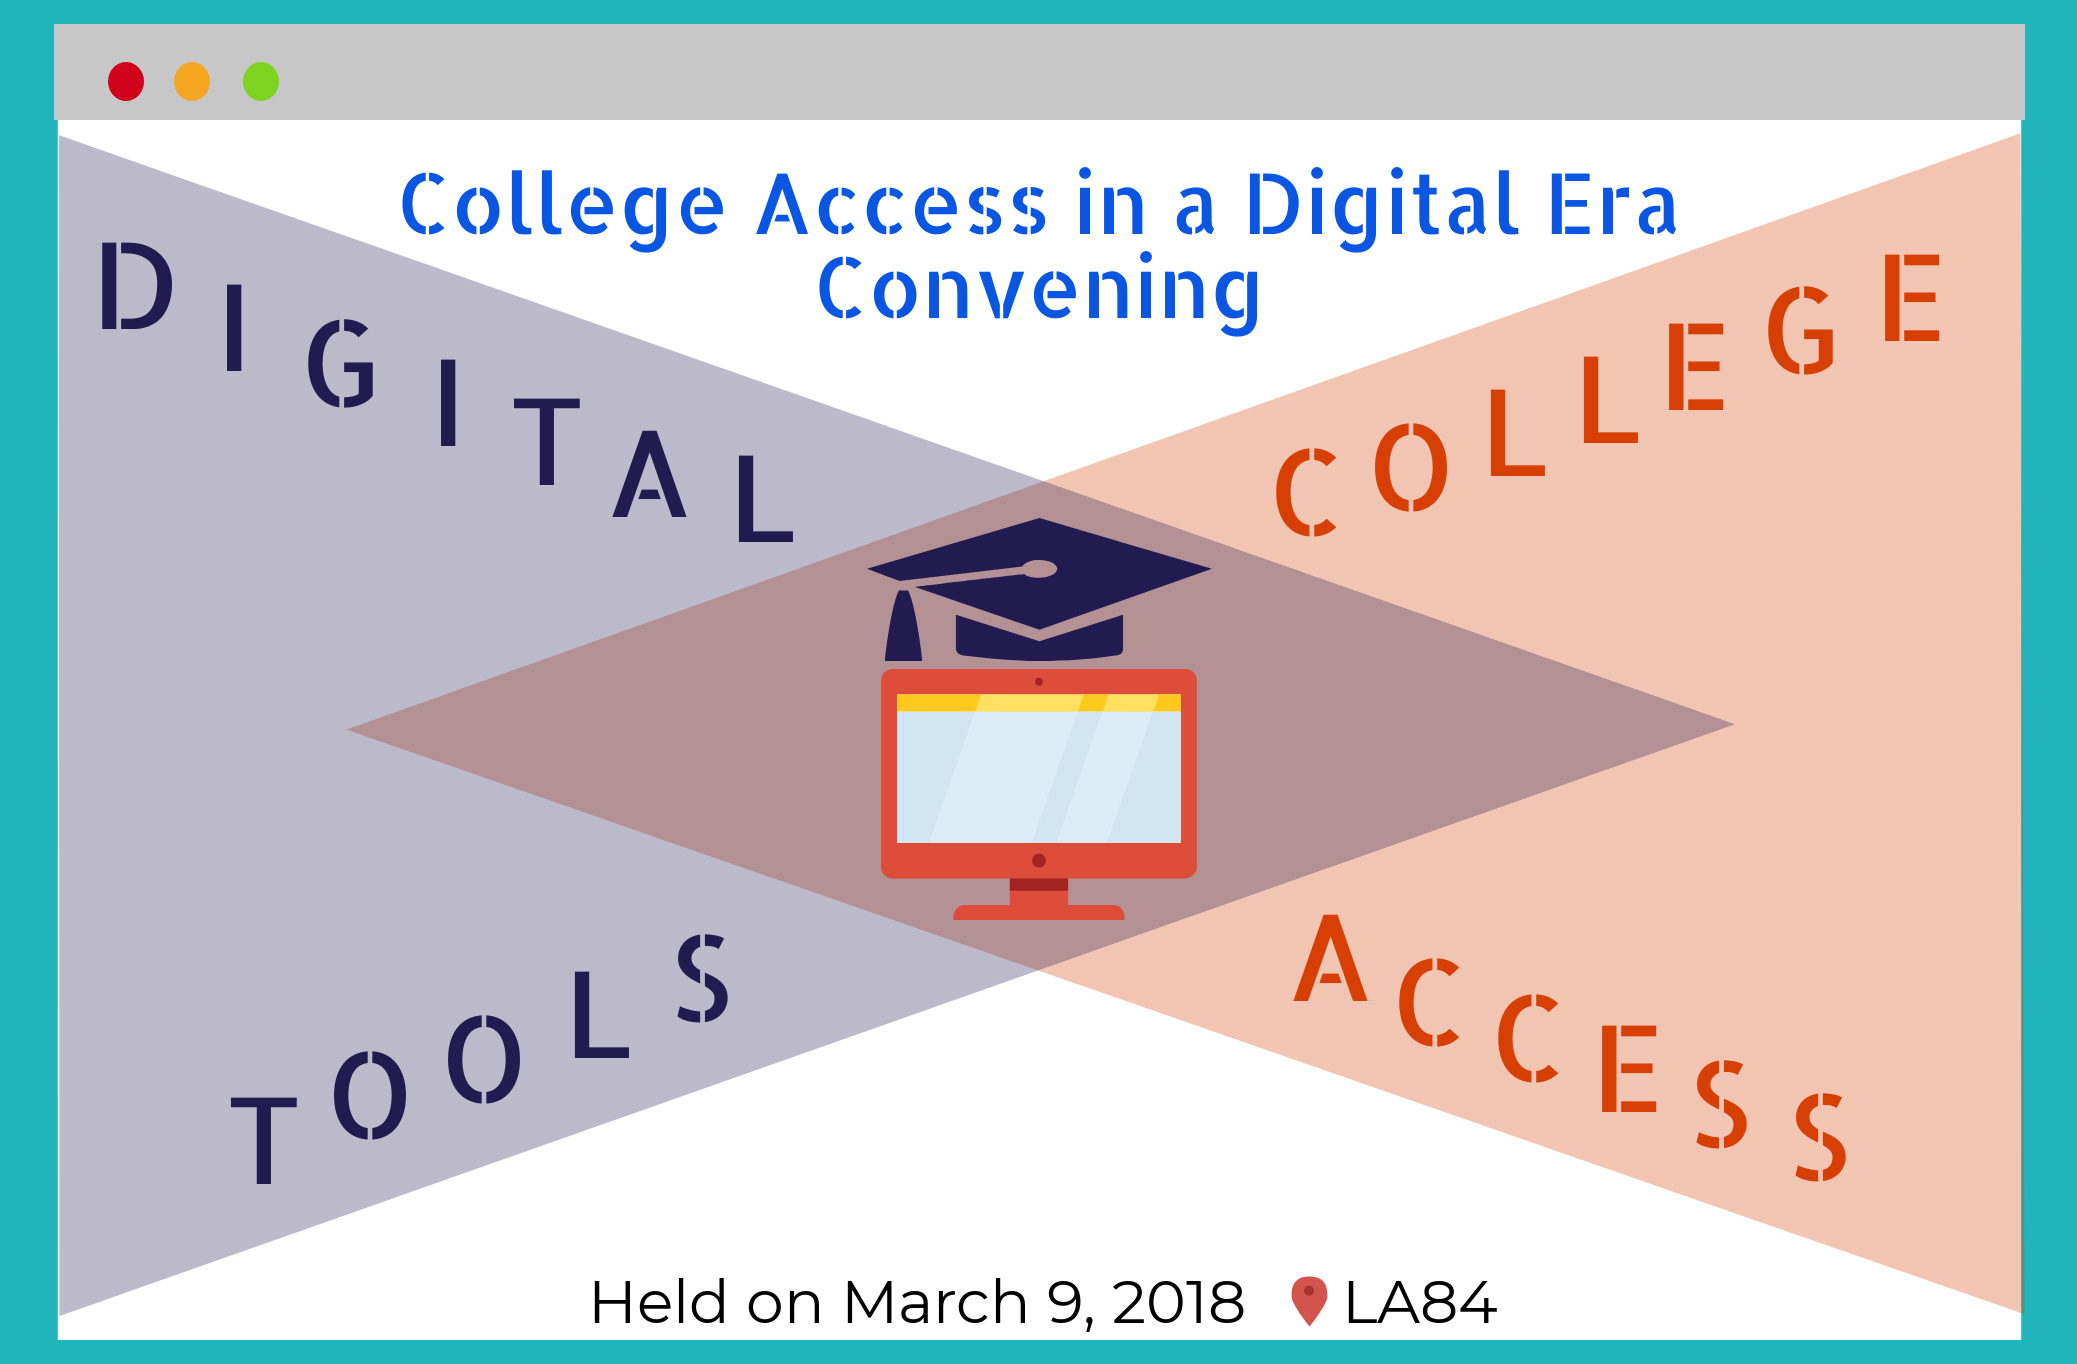 College Access in a Digital Era: Games, videos, and resources